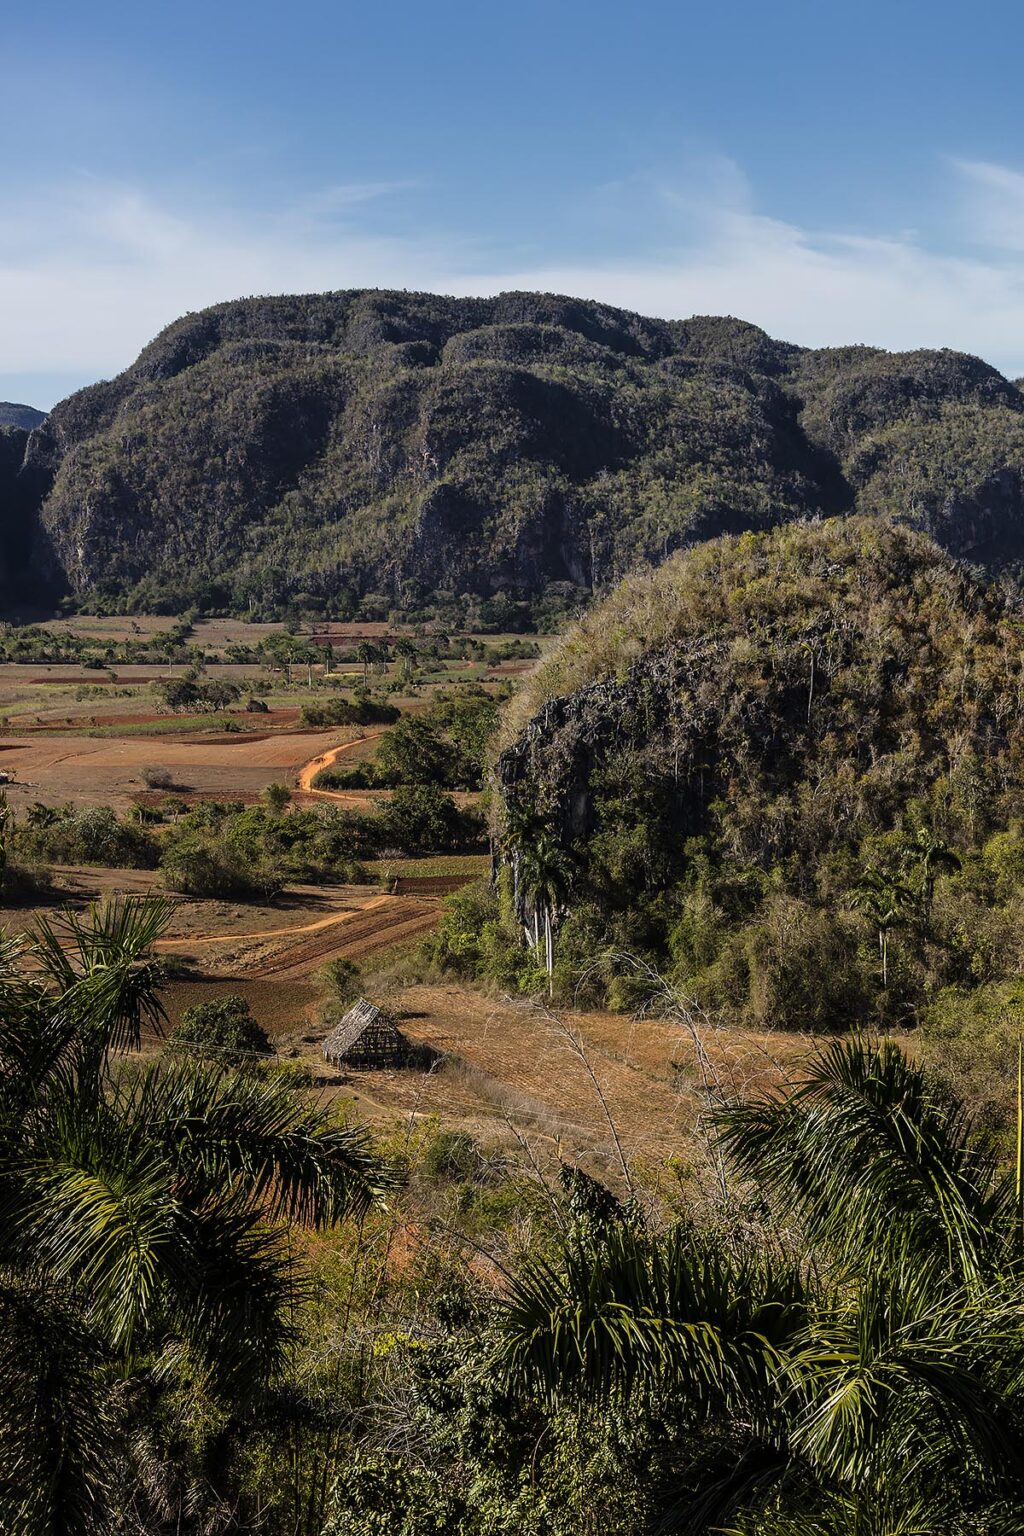 The karst formation of Vinales National Park with agricultural valley in the foreground - VINALES, CUBA